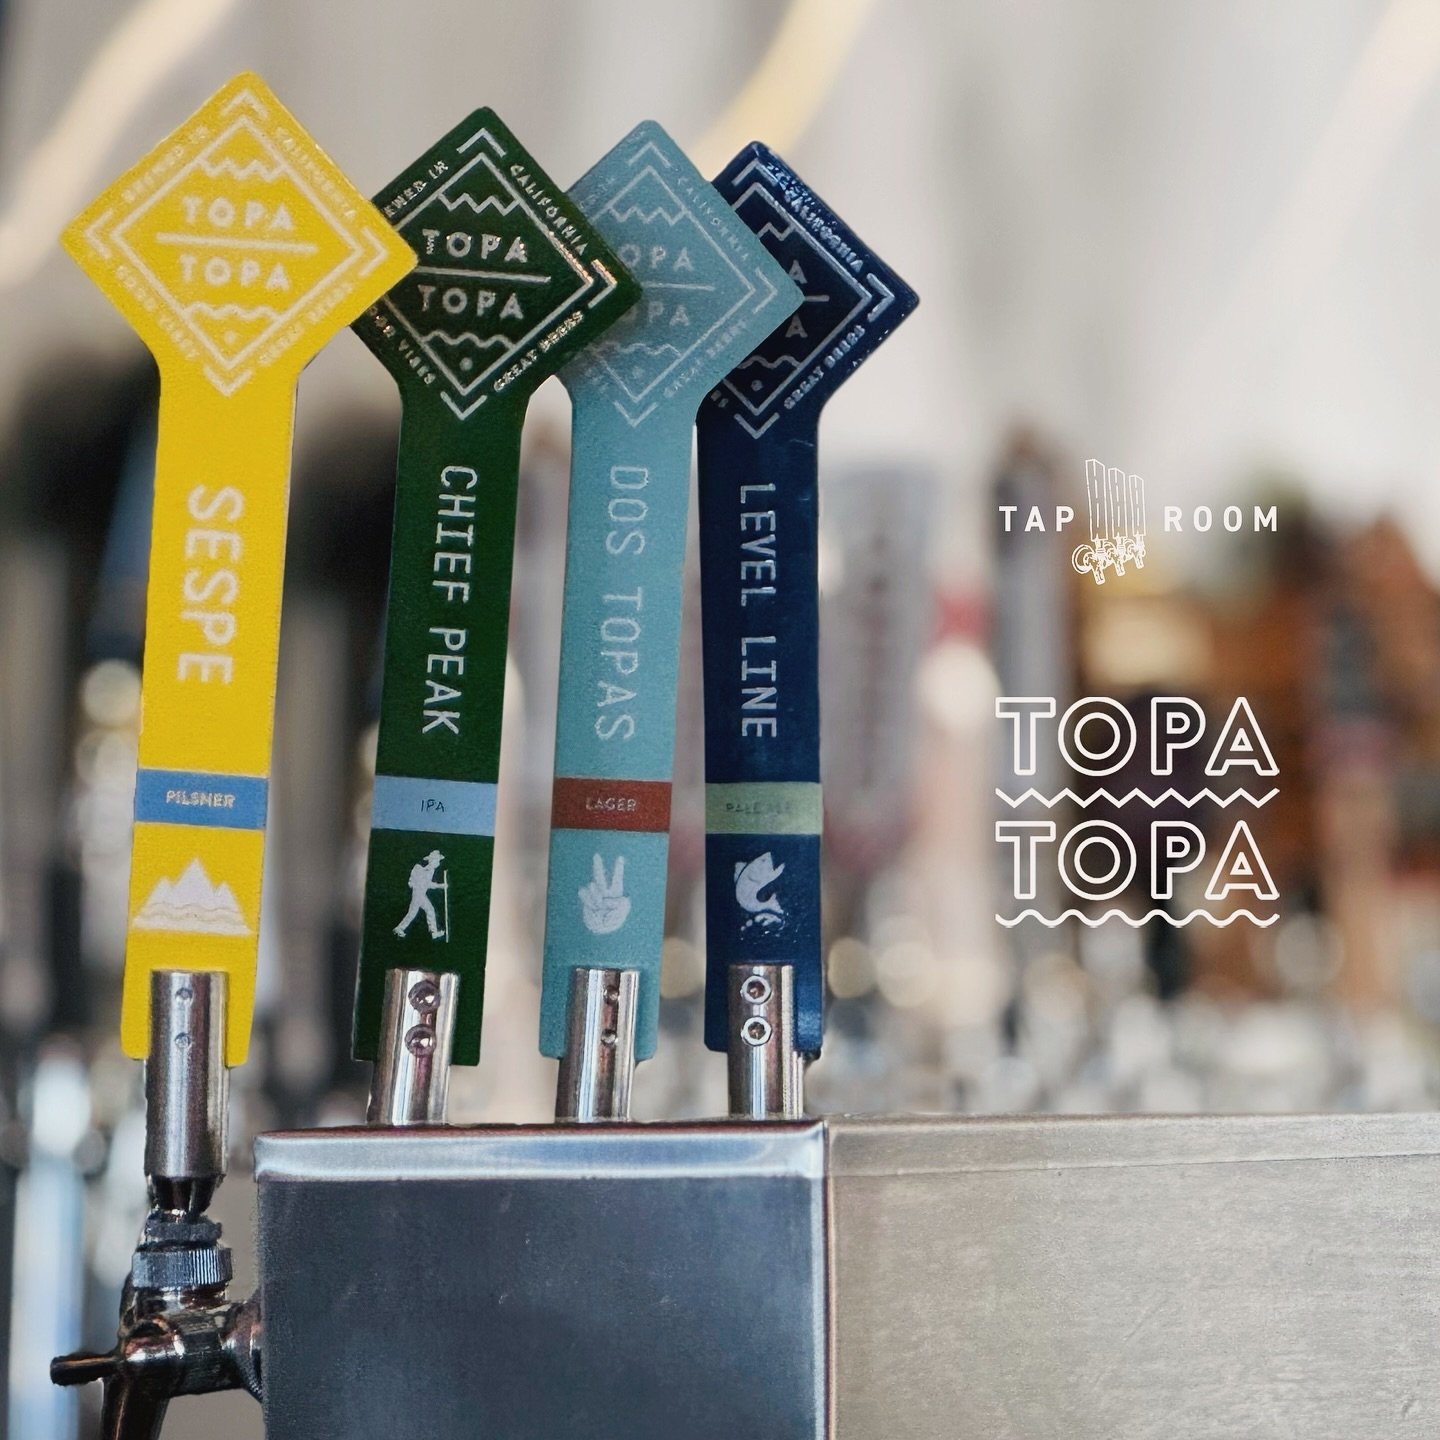 🍺 It&rsquo;s been a @topatopabrewingco #TapTakeover this month! Do you prefer the Level Line Pale Ale, the Dos Topas Lager, the Chief Peak IPA or the Sespe Pilsner? 

🍻 Topa Topa Brewing Co. was founded in 2015 in Ventura, California. We chose them